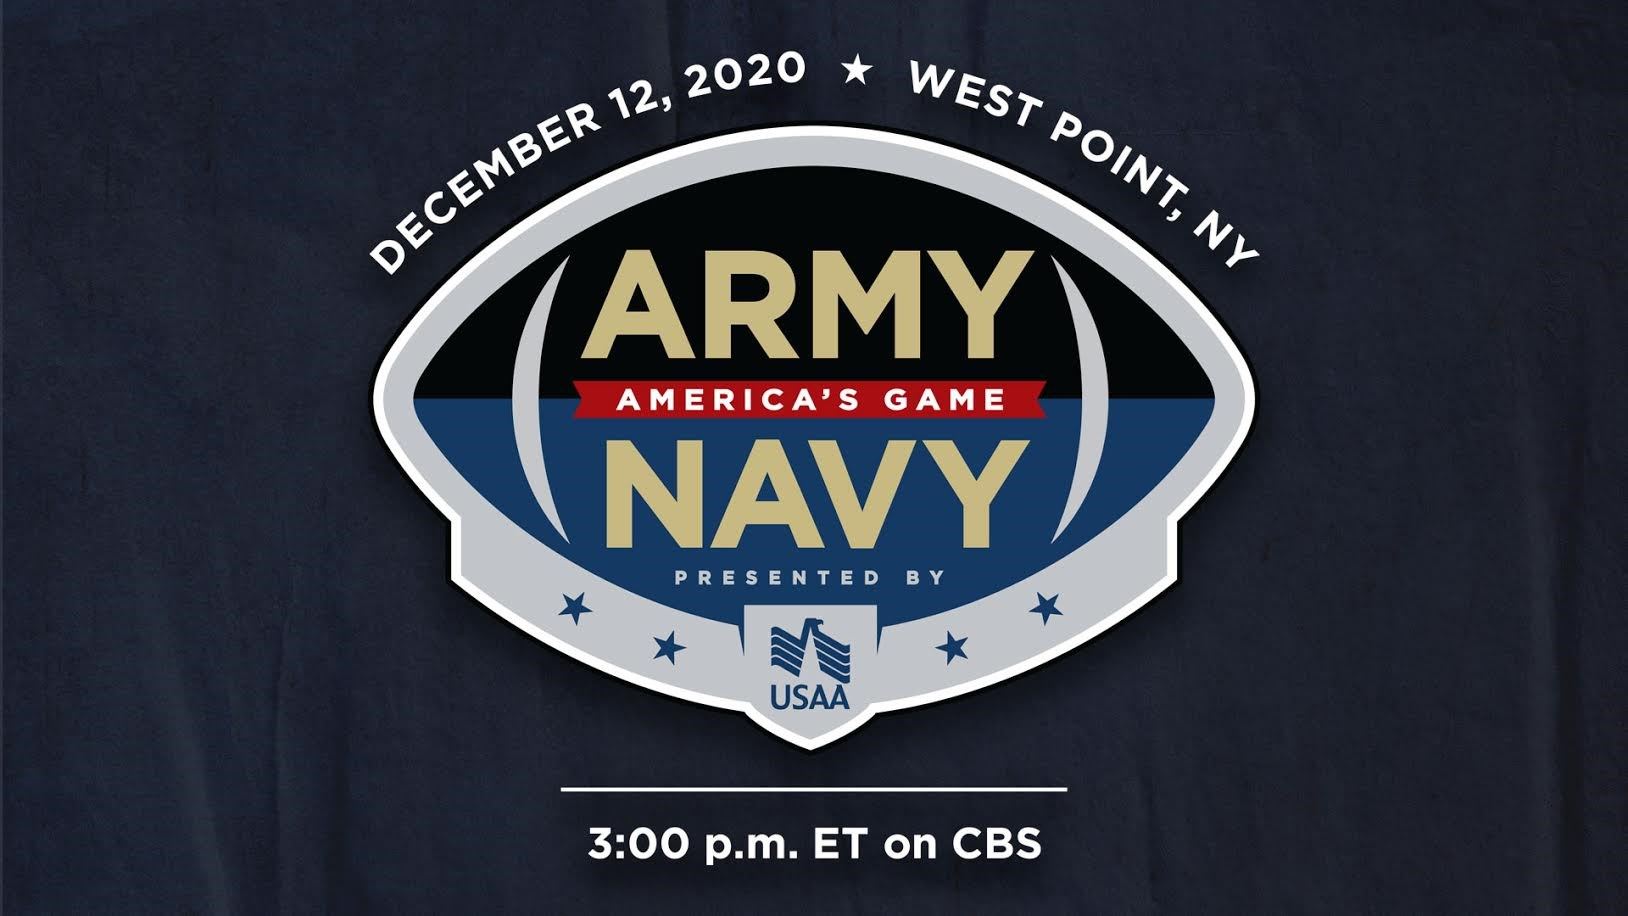 How to Watch Army vs Navy December 12, 2020